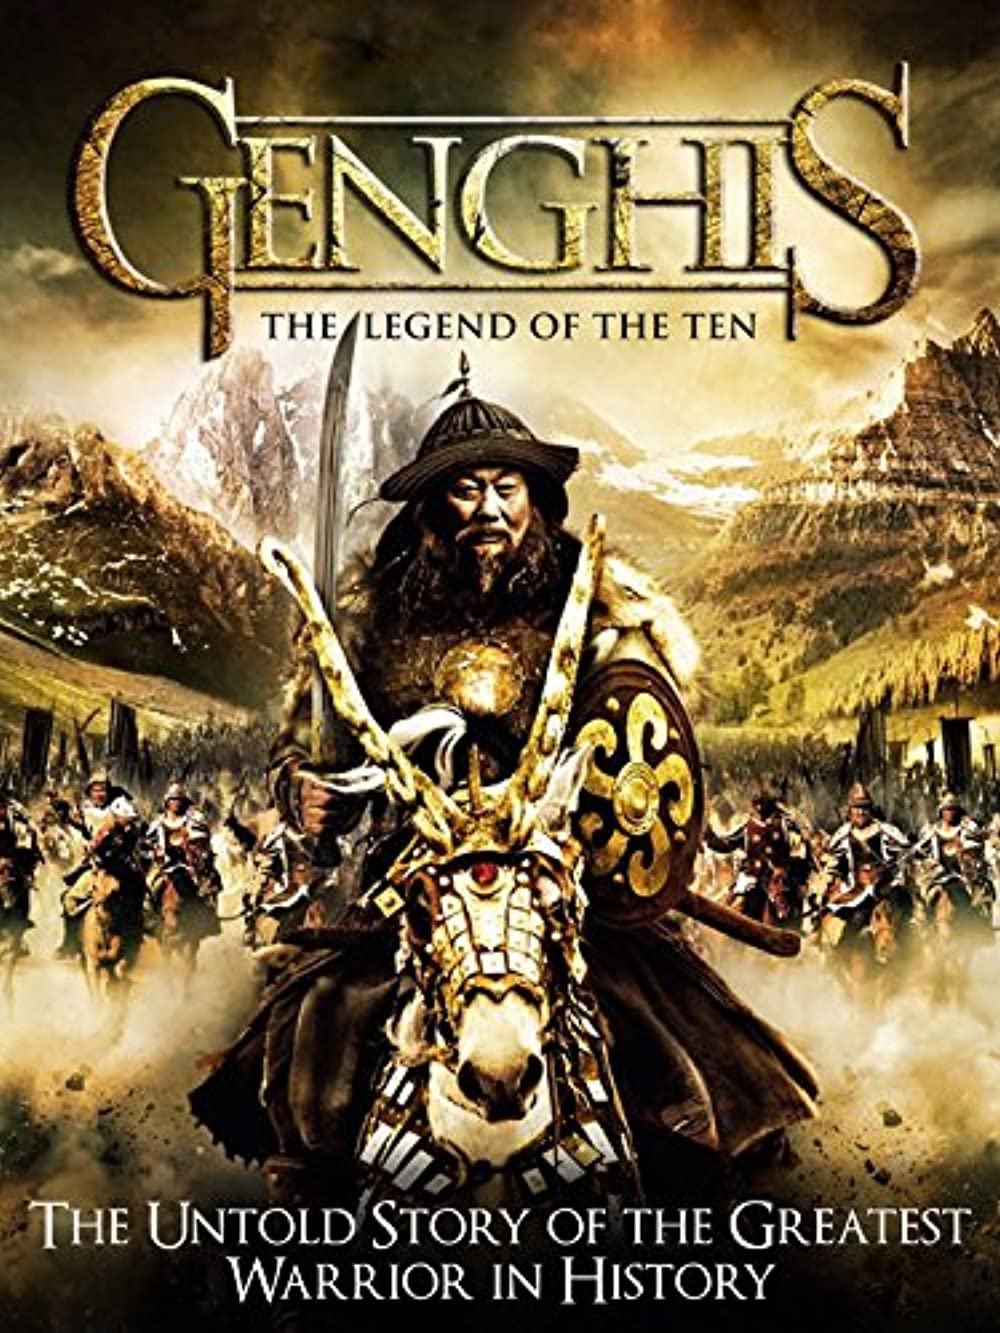 Download Genghis The Legend of the Ten 2012 Hindi ORG Dual Audio 480p BluRay ESub 320MB